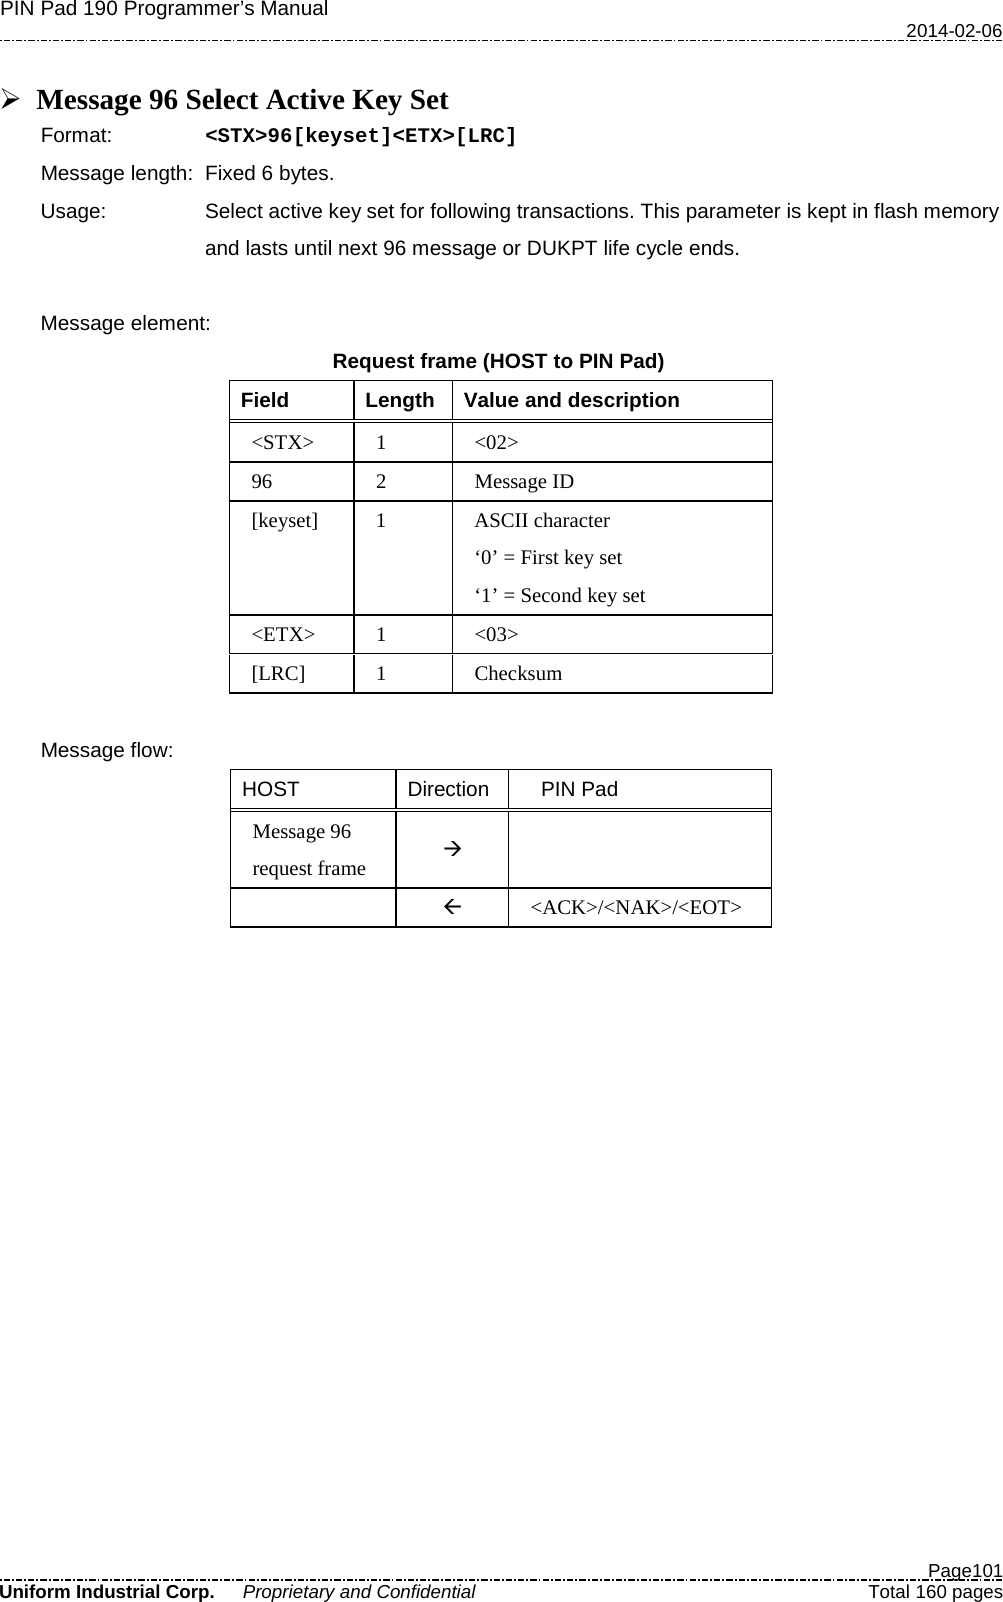 PIN Pad 190 Programmer’s Manual   2014-02-06  Page101 Uniform Industrial Corp. Proprietary and Confidential  Total 160 pages   Message 96 Select Active Key Set Format:   &lt;STX&gt;96[keyset]&lt;ETX&gt;[LRC] Message length: Fixed 6 bytes. Usage: Select active key set for following transactions. This parameter is kept in flash memory and lasts until next 96 message or DUKPT life cycle ends.  Message element:   Request frame (HOST to PIN Pad) Field  Length  Value and description &lt;STX&gt;  1  &lt;02&gt; 96  2  Message ID [keyset]  1  ASCII character ‘0’ = First key set ‘1’ = Second key set &lt;ETX&gt;  1  &lt;03&gt; [LRC]  1  Checksum  Message flow: HOST Direction   PIN Pad Message 96 request frame     &lt;ACK&gt;/&lt;NAK&gt;/&lt;EOT&gt;  